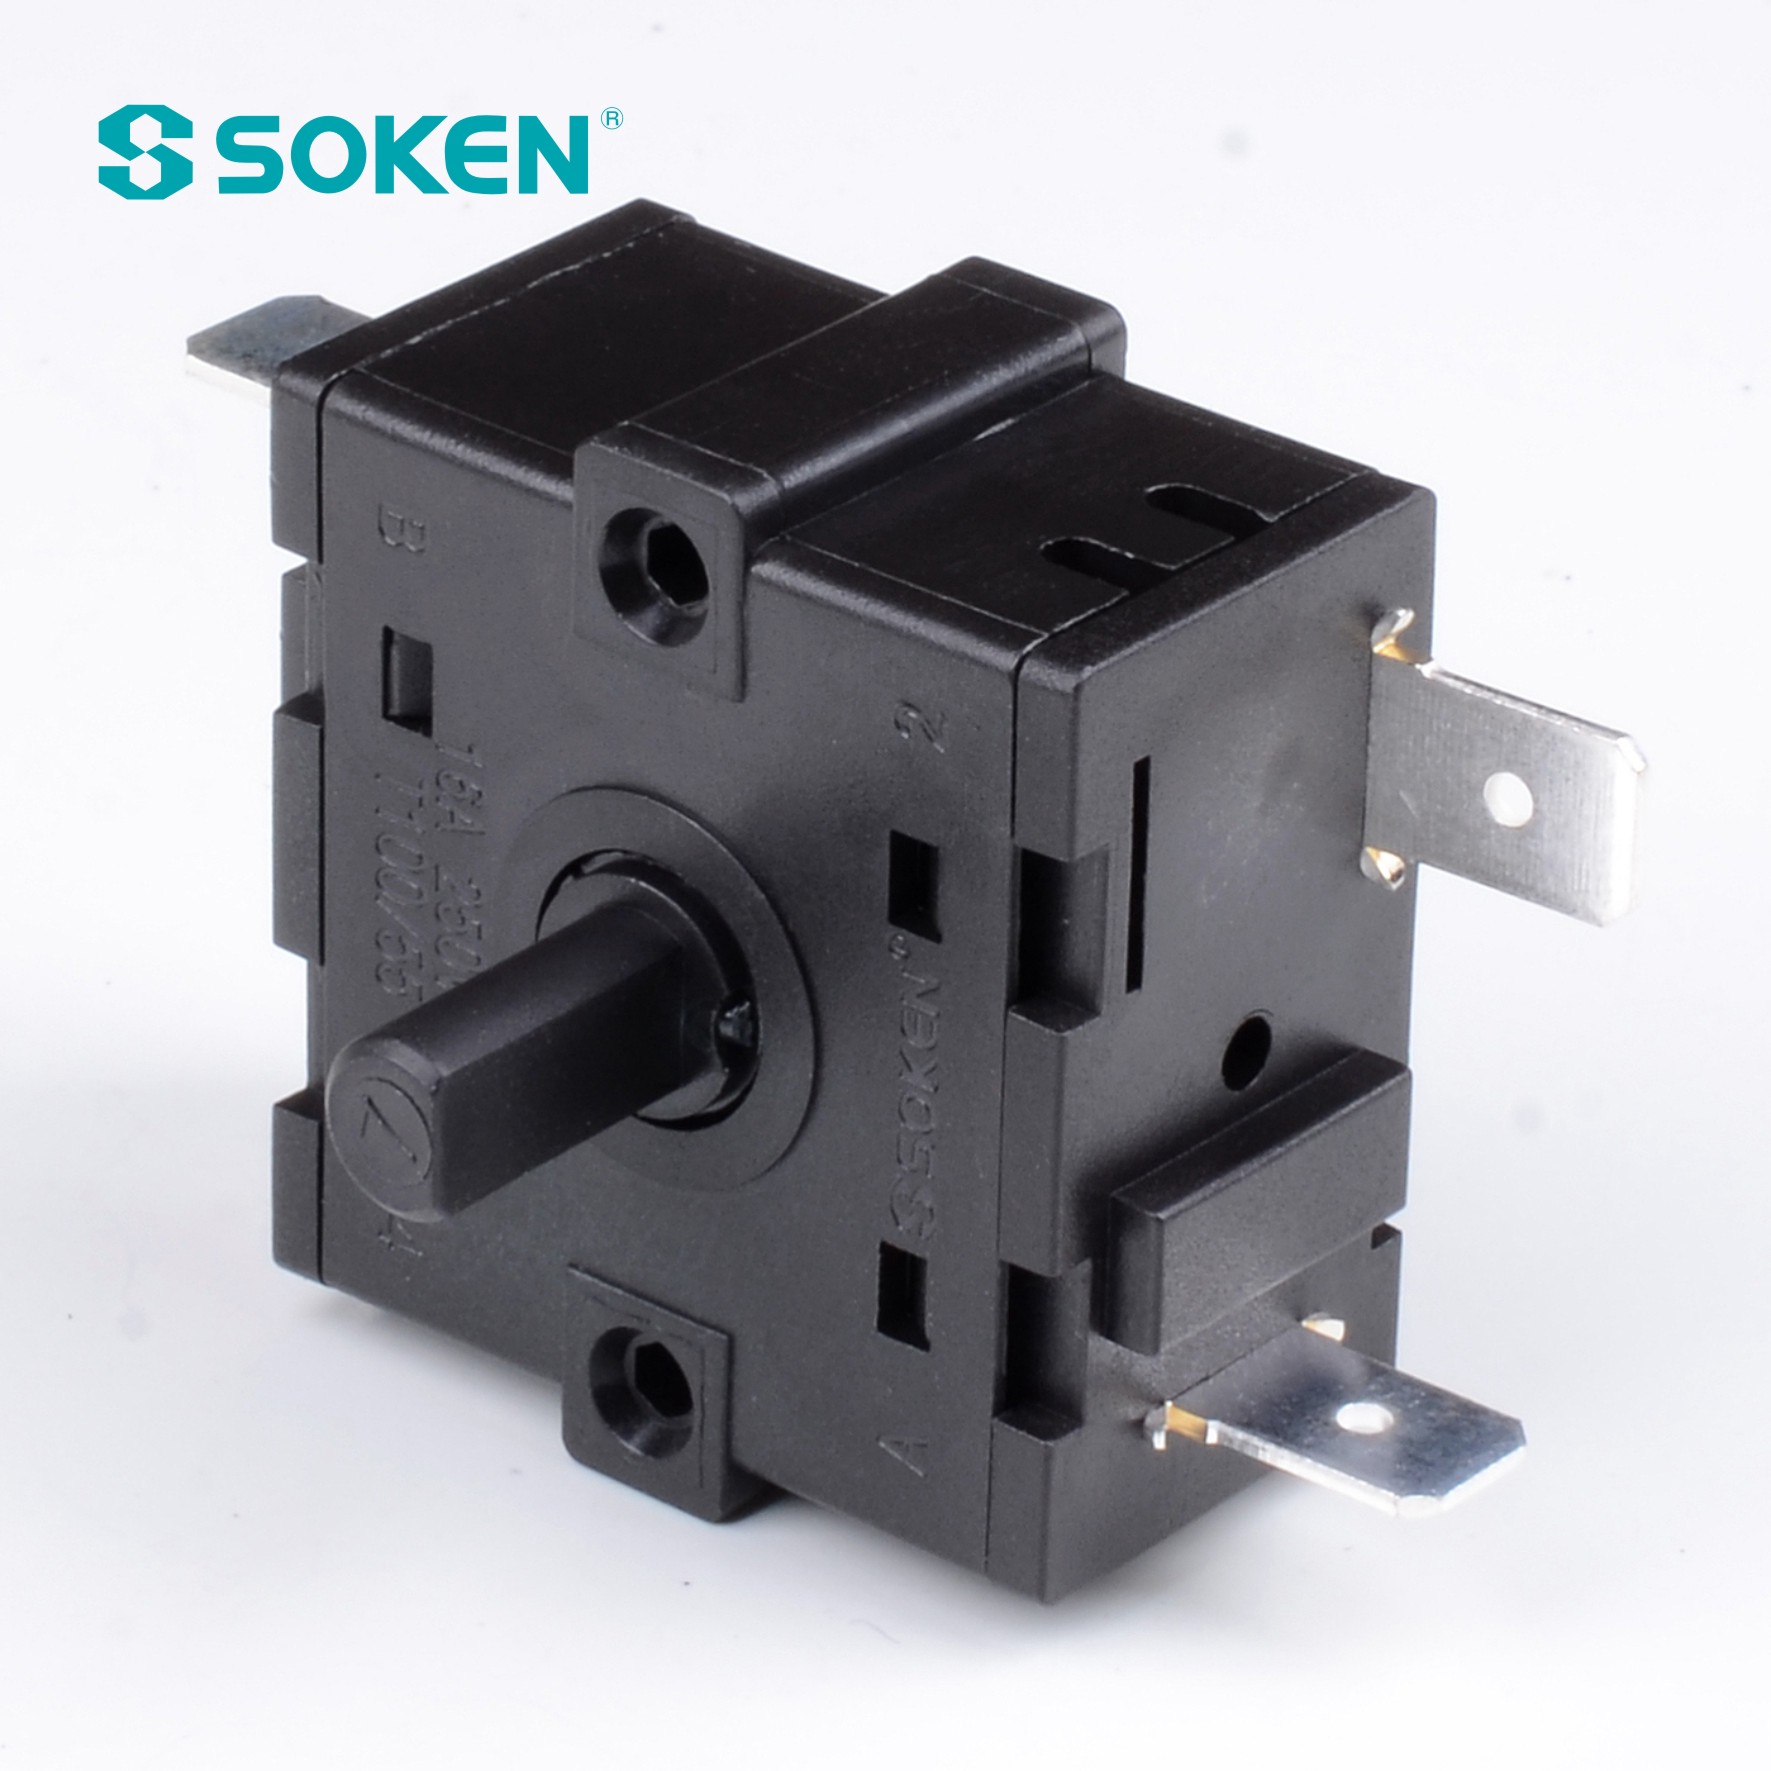 I-Soken Electric Heater Multi Position Rotary Switch 16A 250V Rt243-3